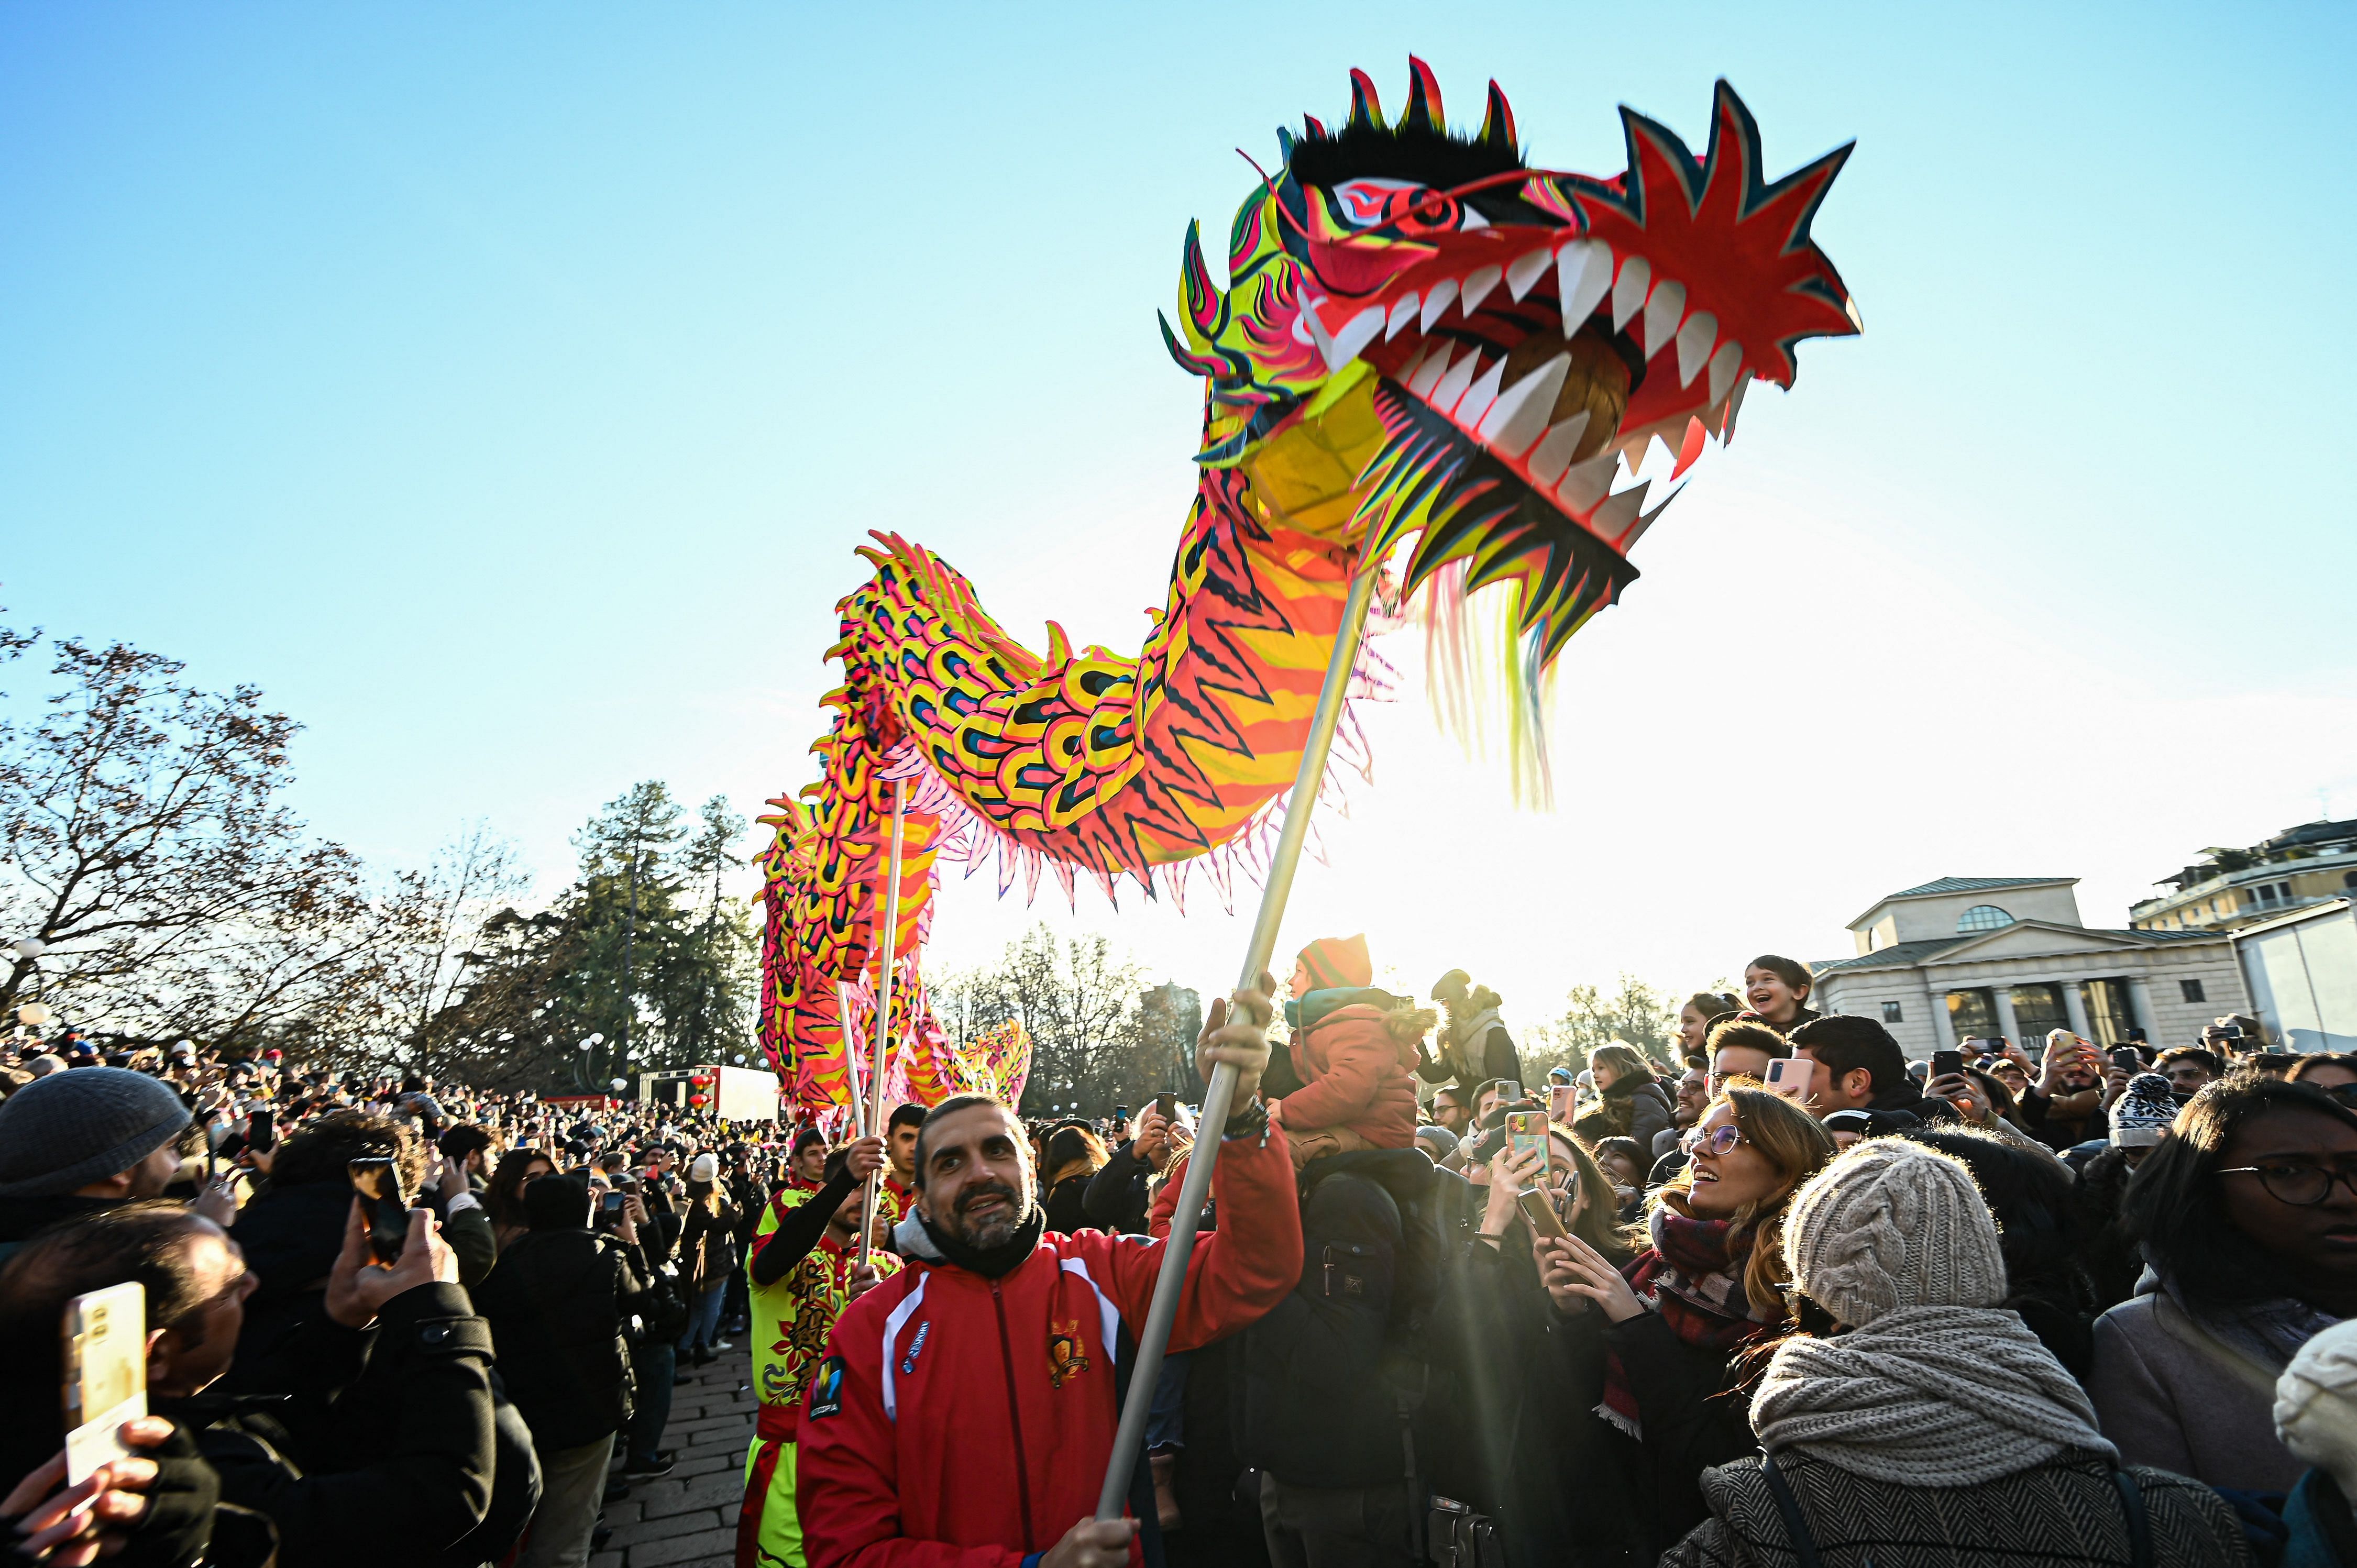 Performers take part in a parade celebrating the Chinese Lunar New Year of the Rabbit, in central Milan, Italy. Credit: AFP Photo